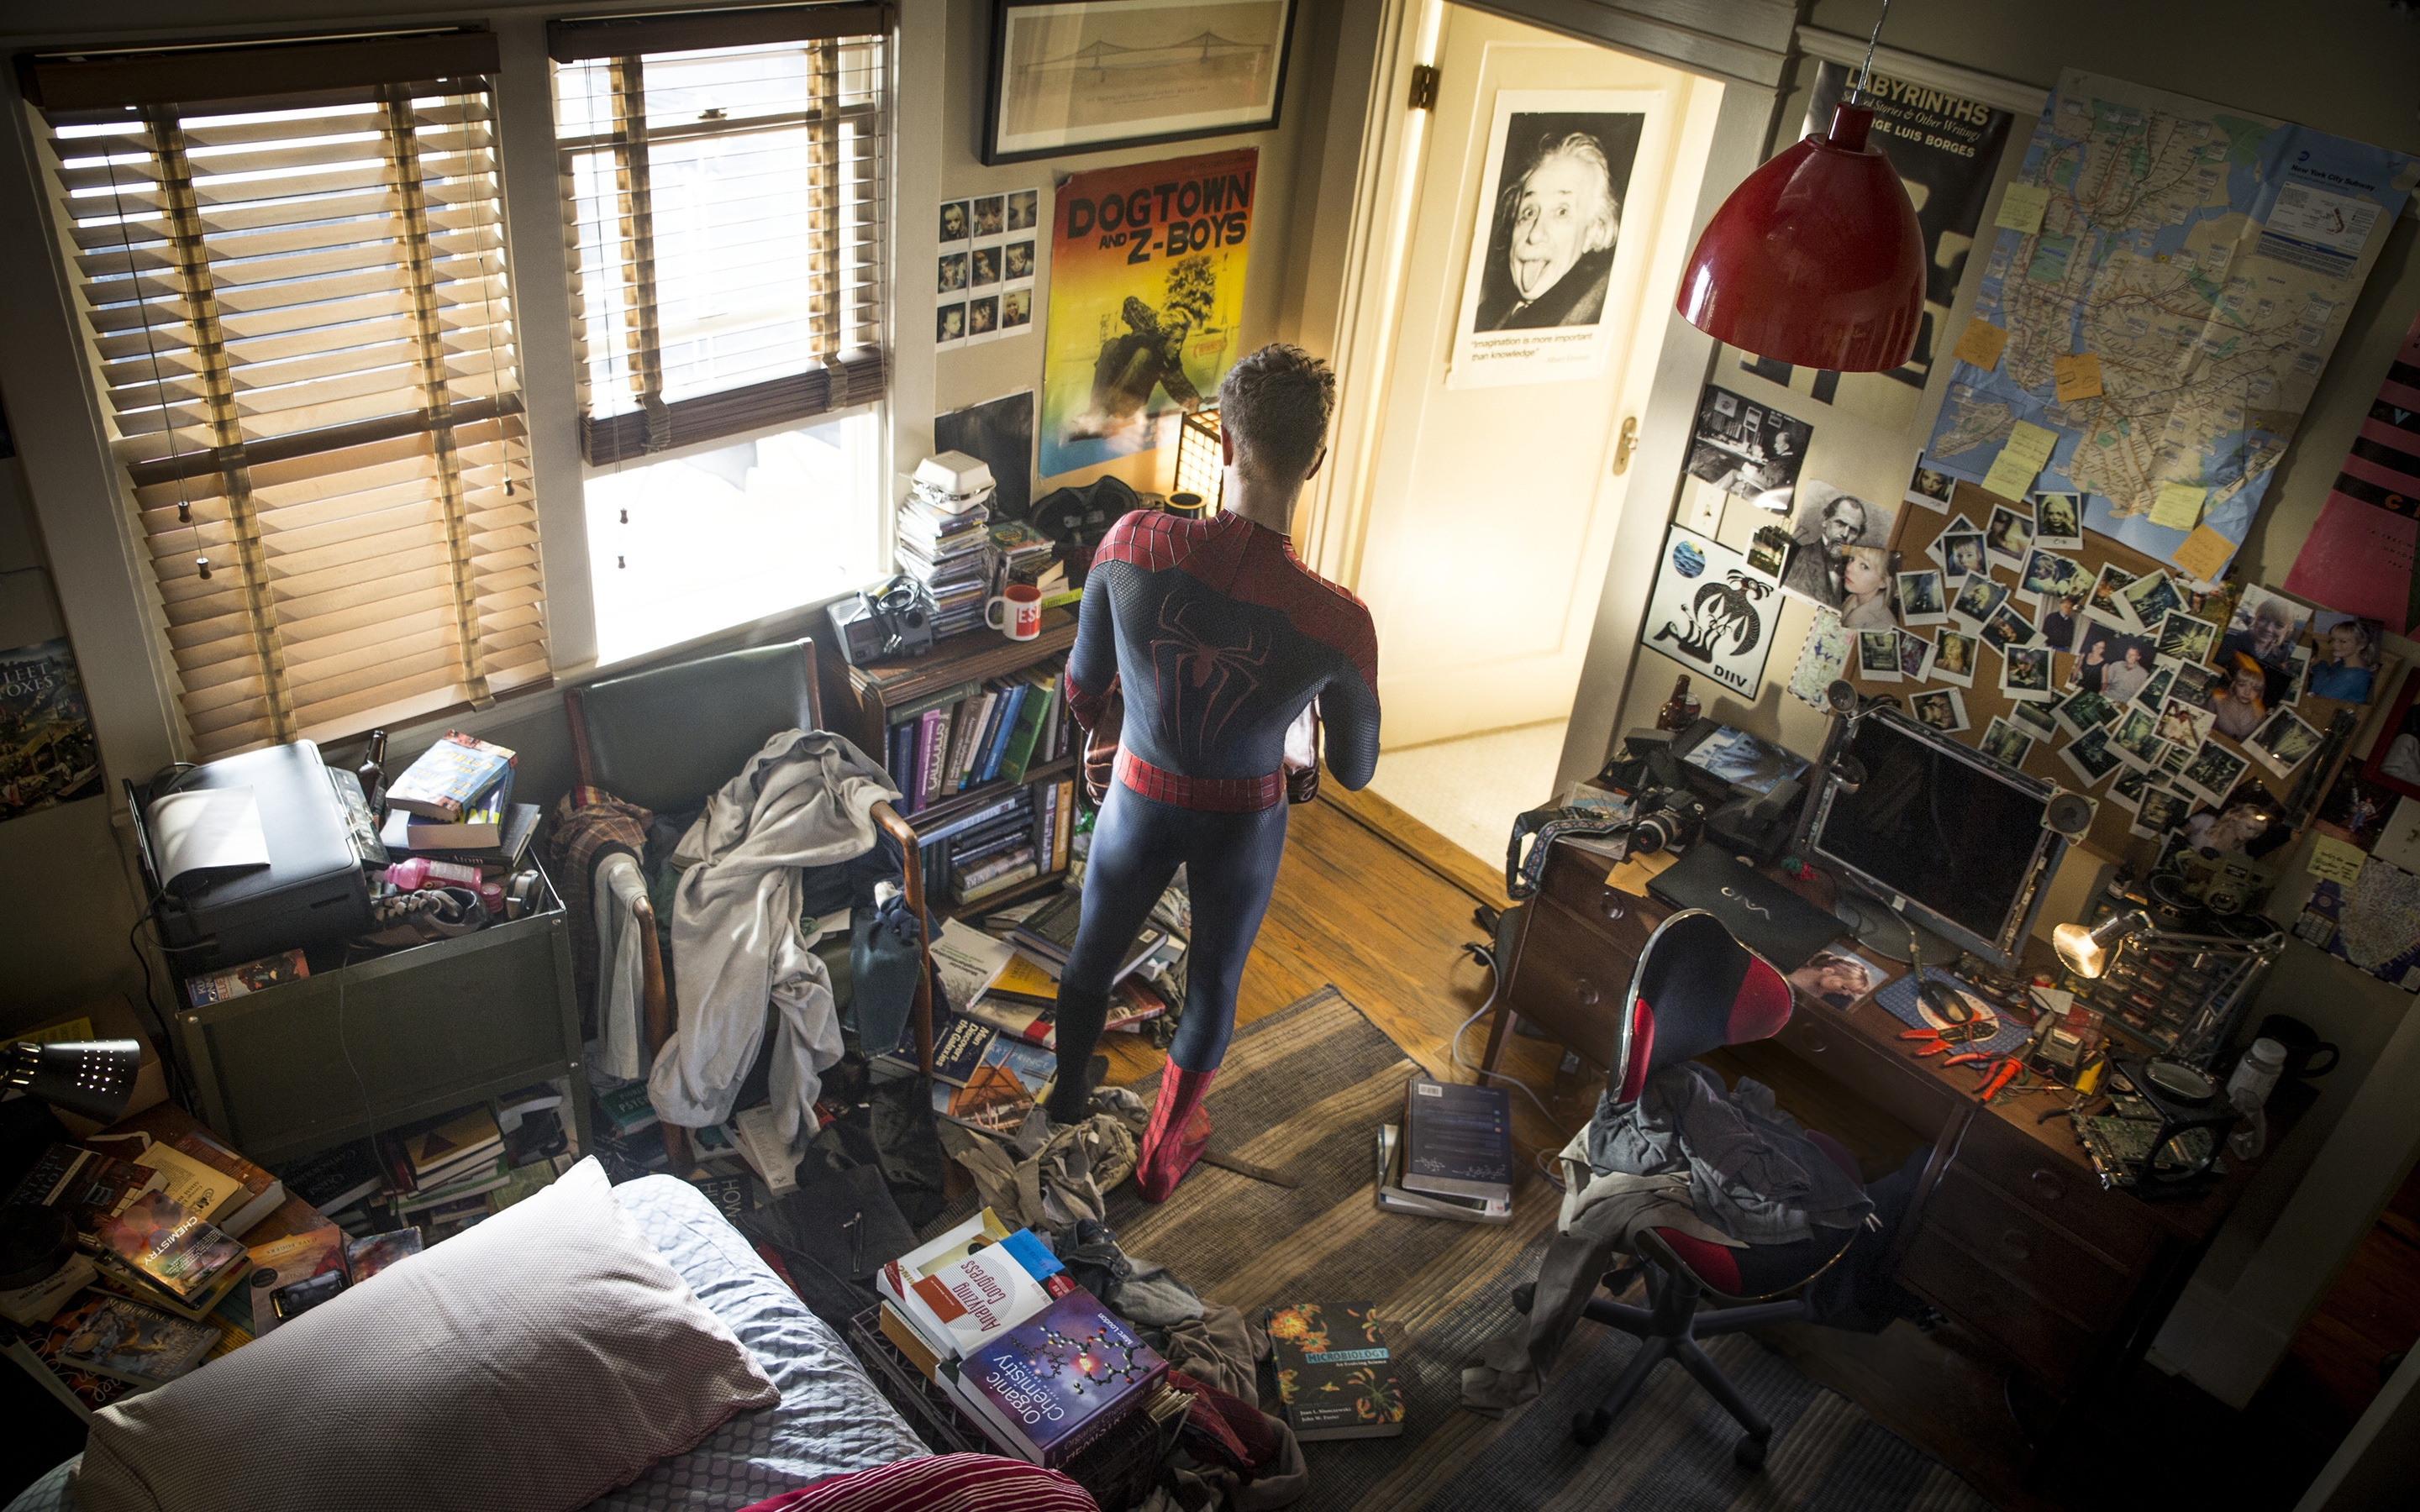 The Amazing Spider-Man 2 for 2880 x 1800 Retina Display resolution